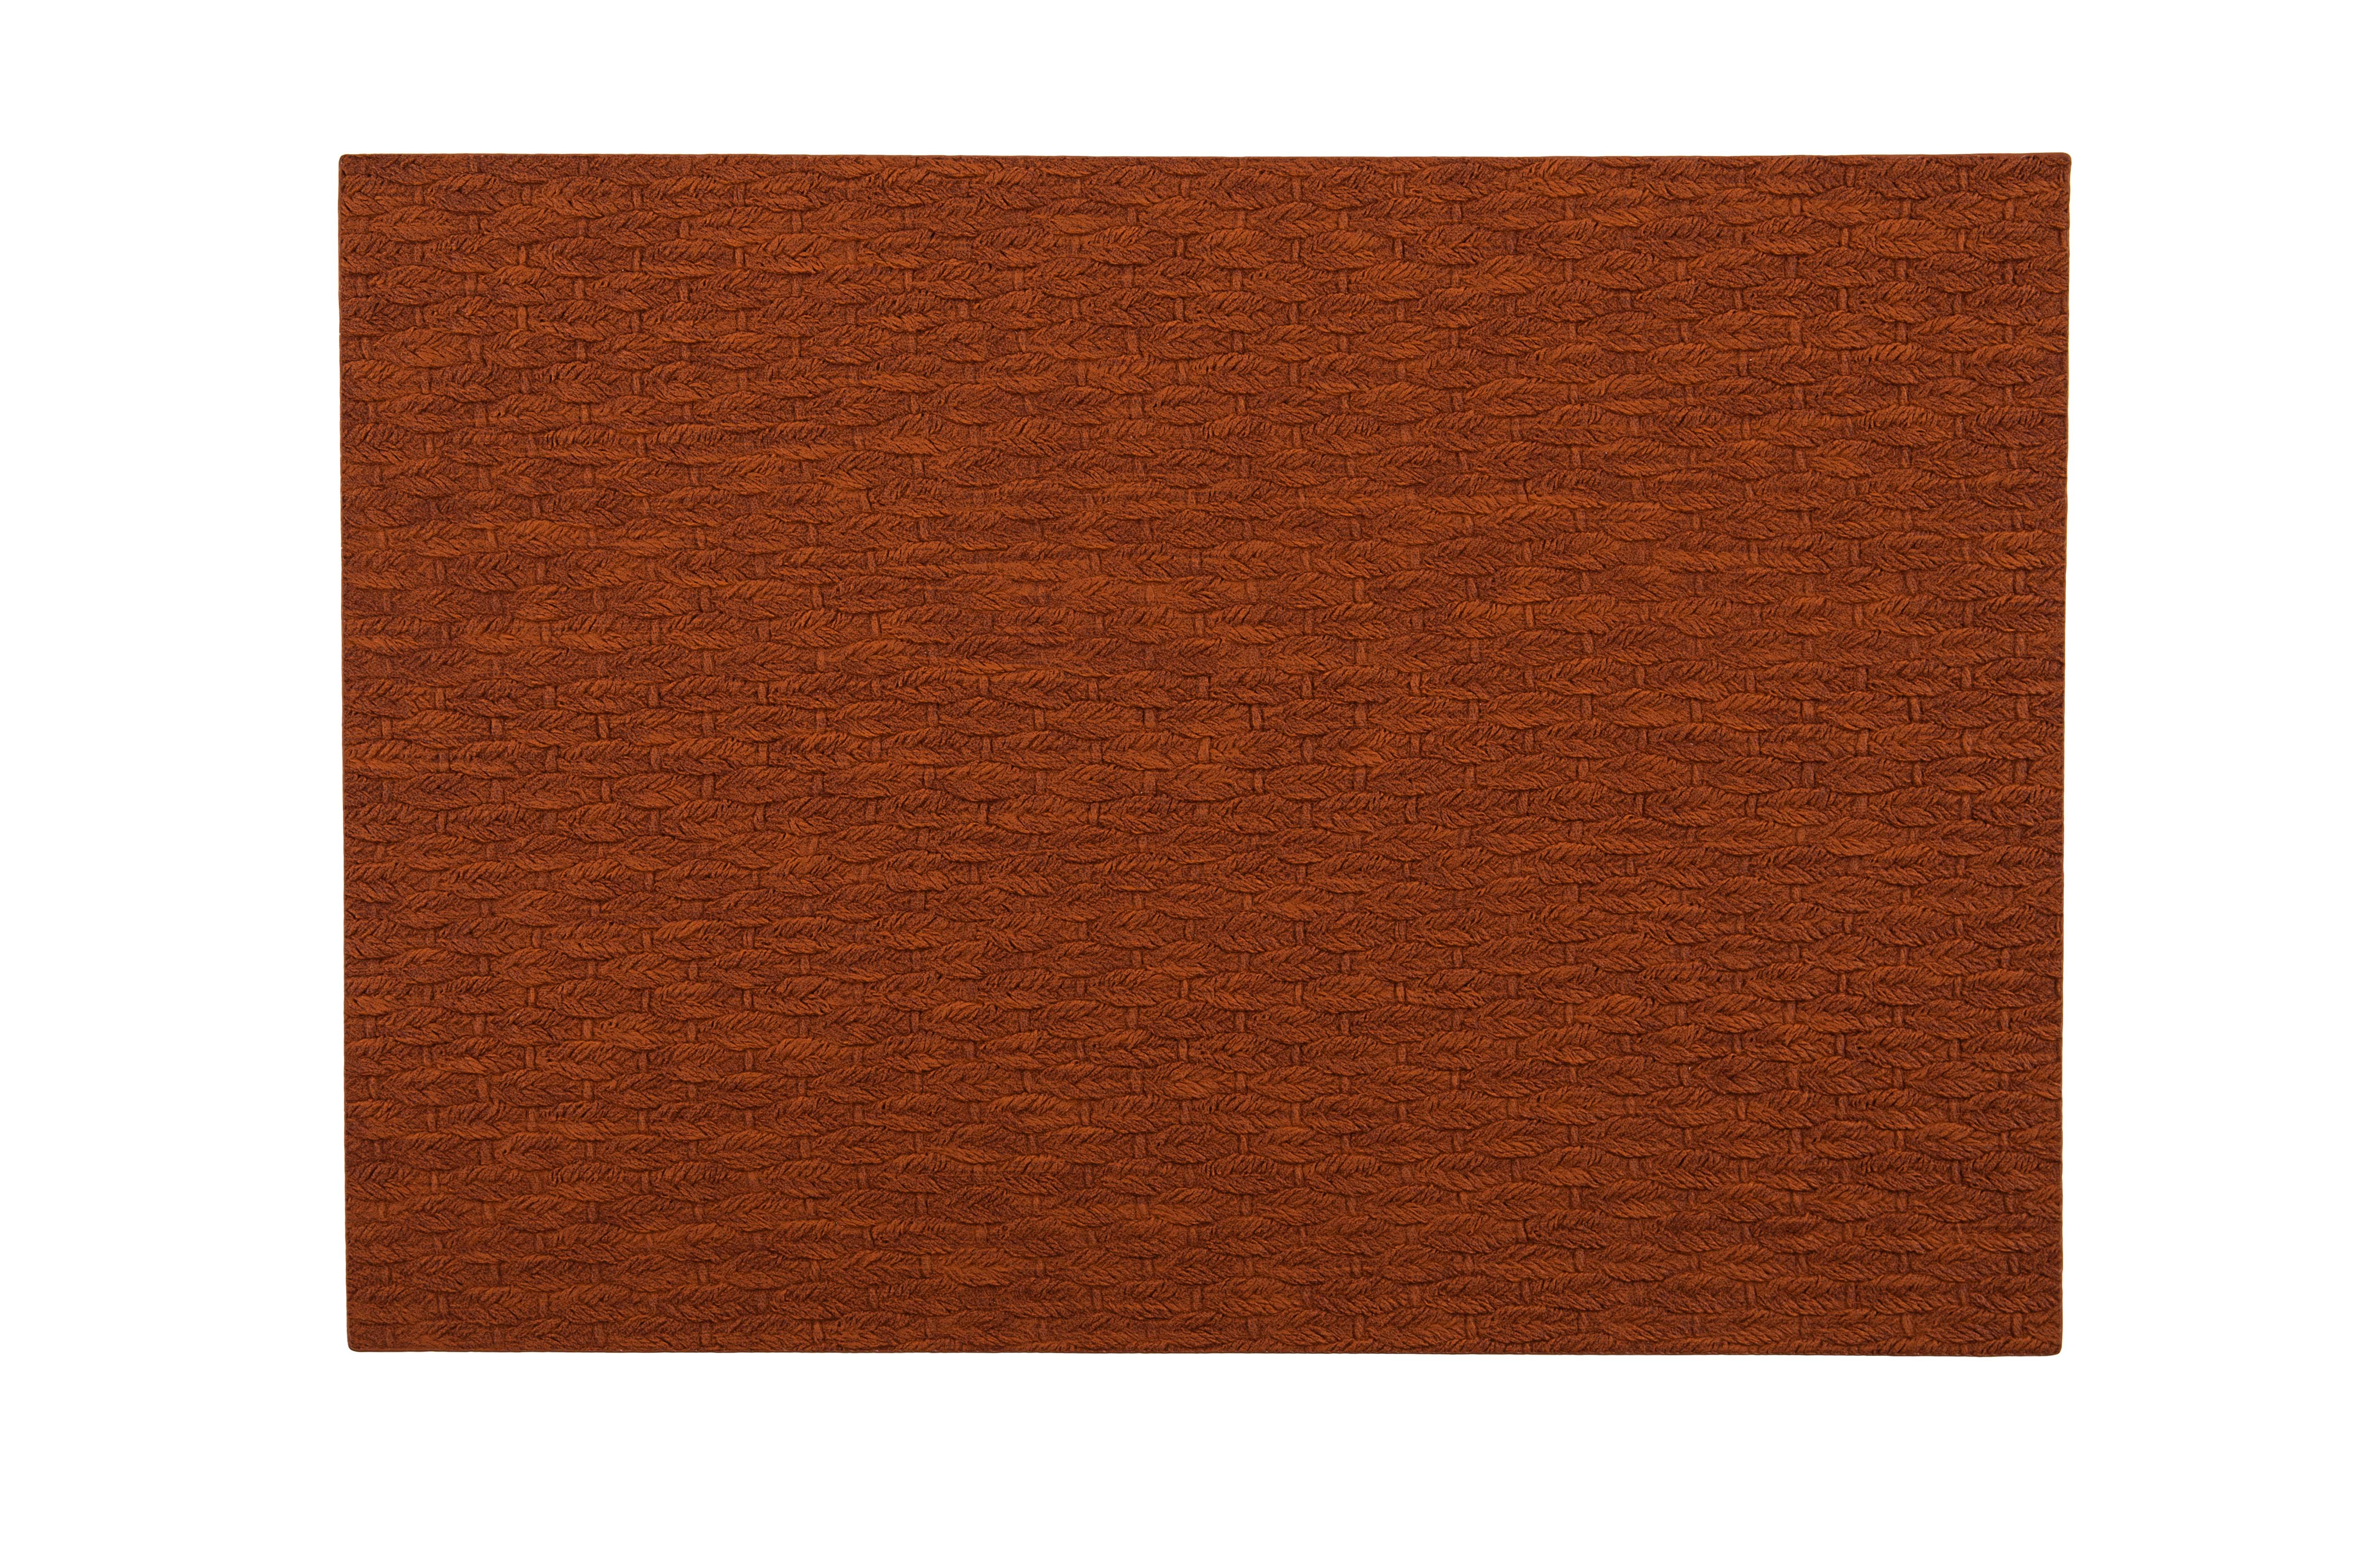 Placemat ARBIN - Leather look imitation- 45x33cm, brown